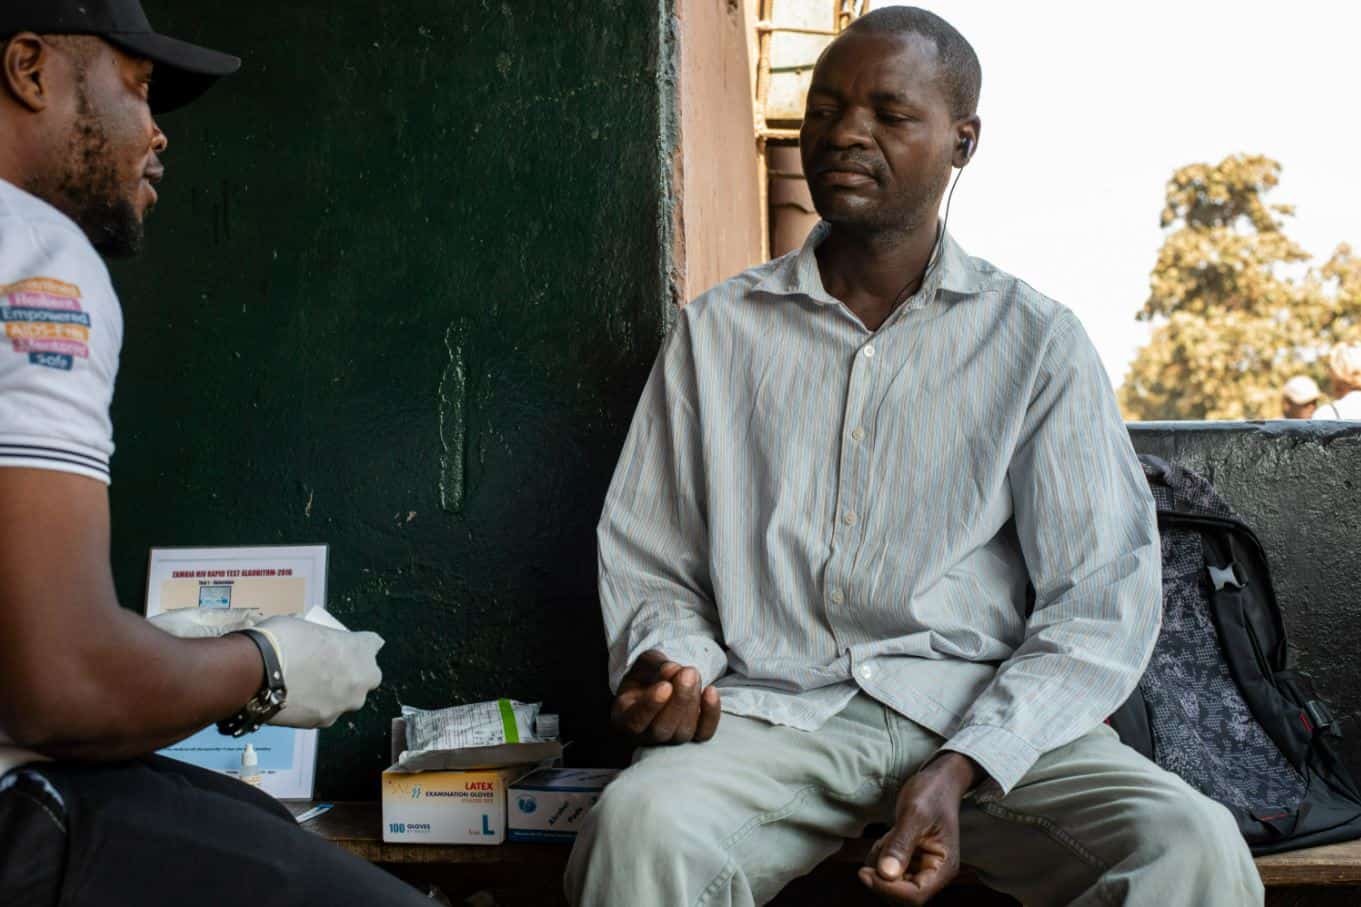 A Zambian man speaks with a health worker about condoms